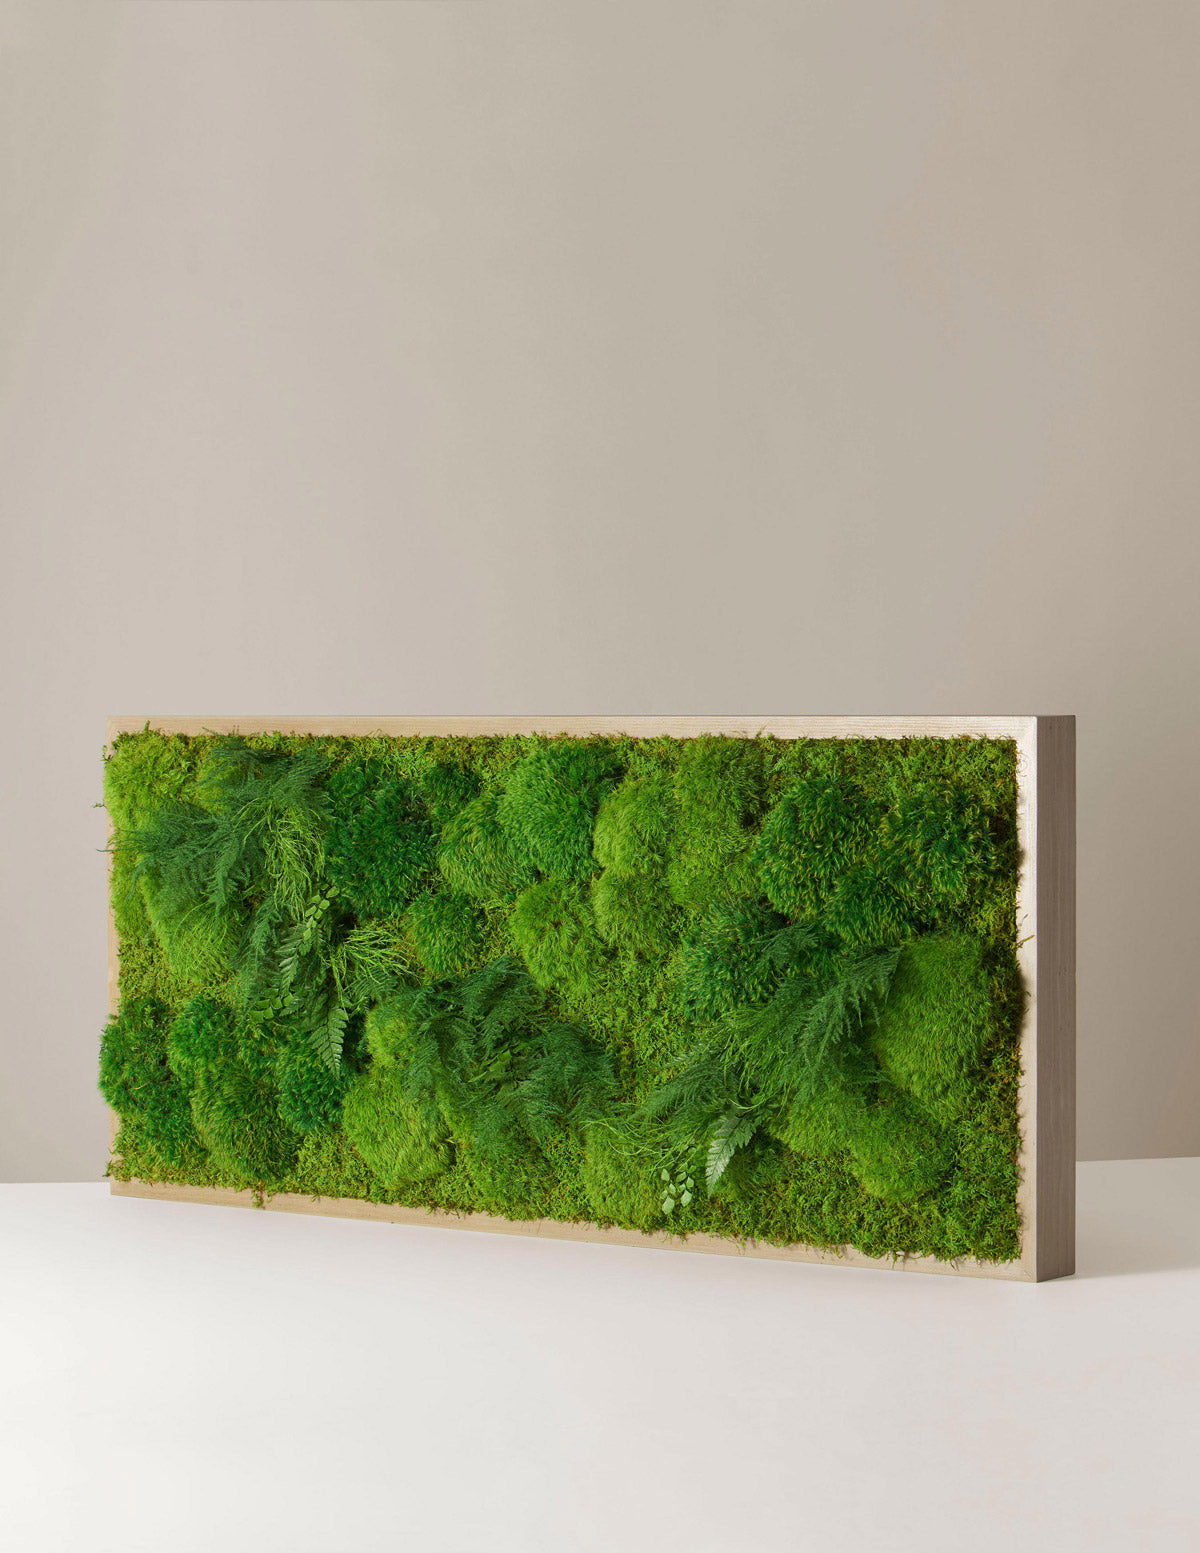 Buy Easy Moss To Grow For Sale Online